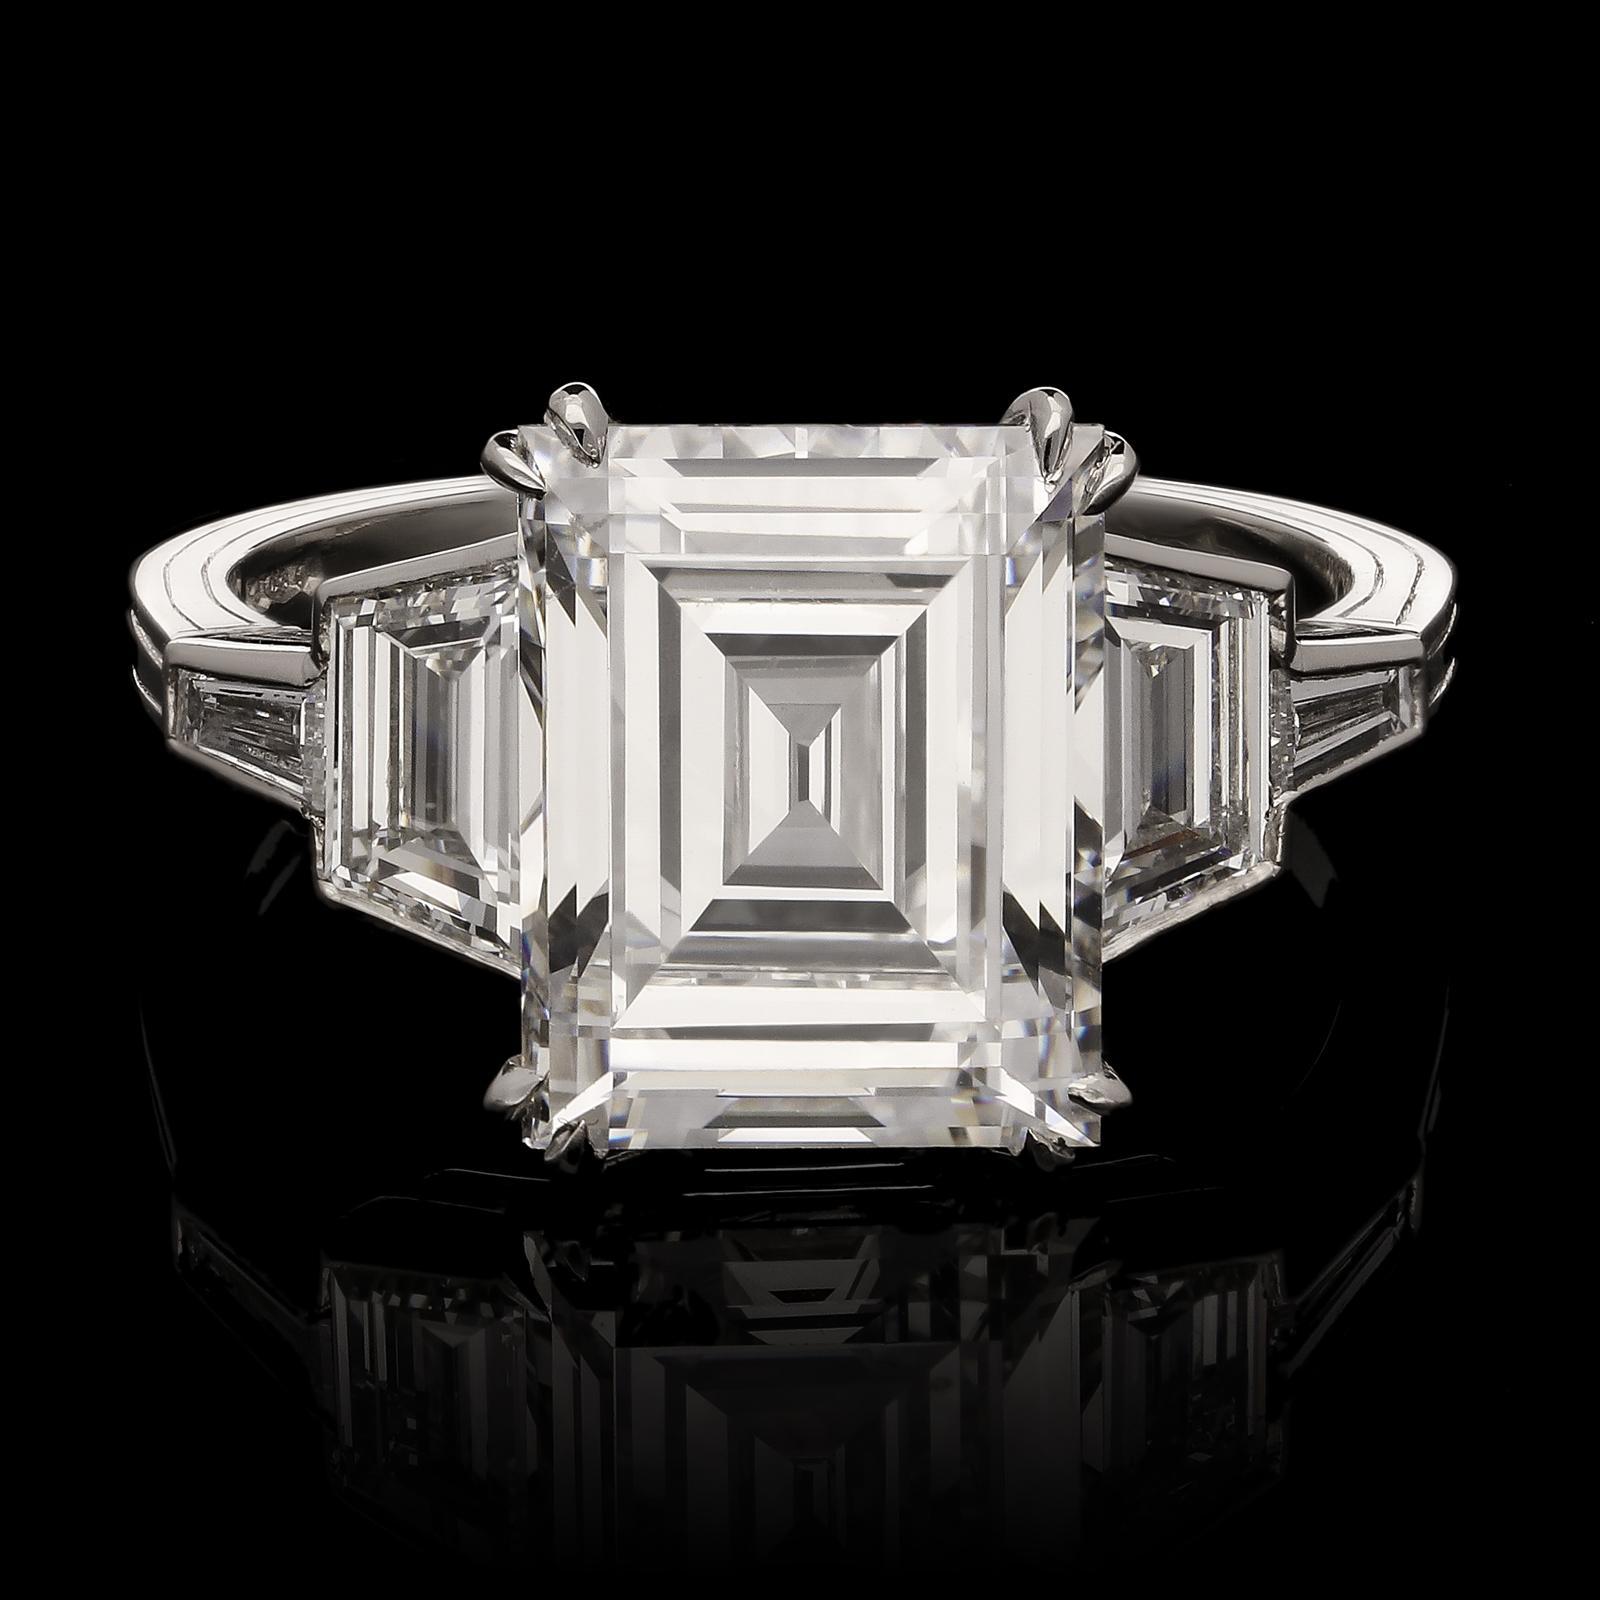 A stunning carré-cut diamond ring by Hancocks, centred with a vintage cut carré diamond weighing 4.09cts and of F colour and VS1 clarity corner claw set in platinum between shoulders set with trapezoid and tapered baguette diamonds, these create a